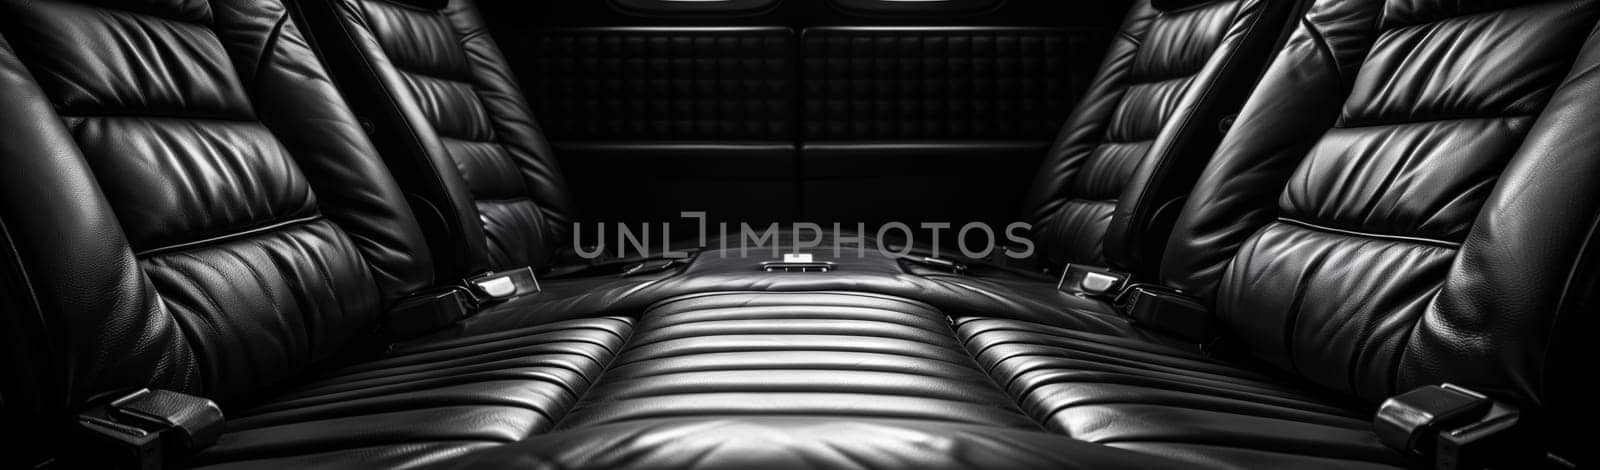 A monochromatic image showcasing the back seats of a car with flashes of light, dark wood, metal accents, tinted windows, and a symmetrical pattern